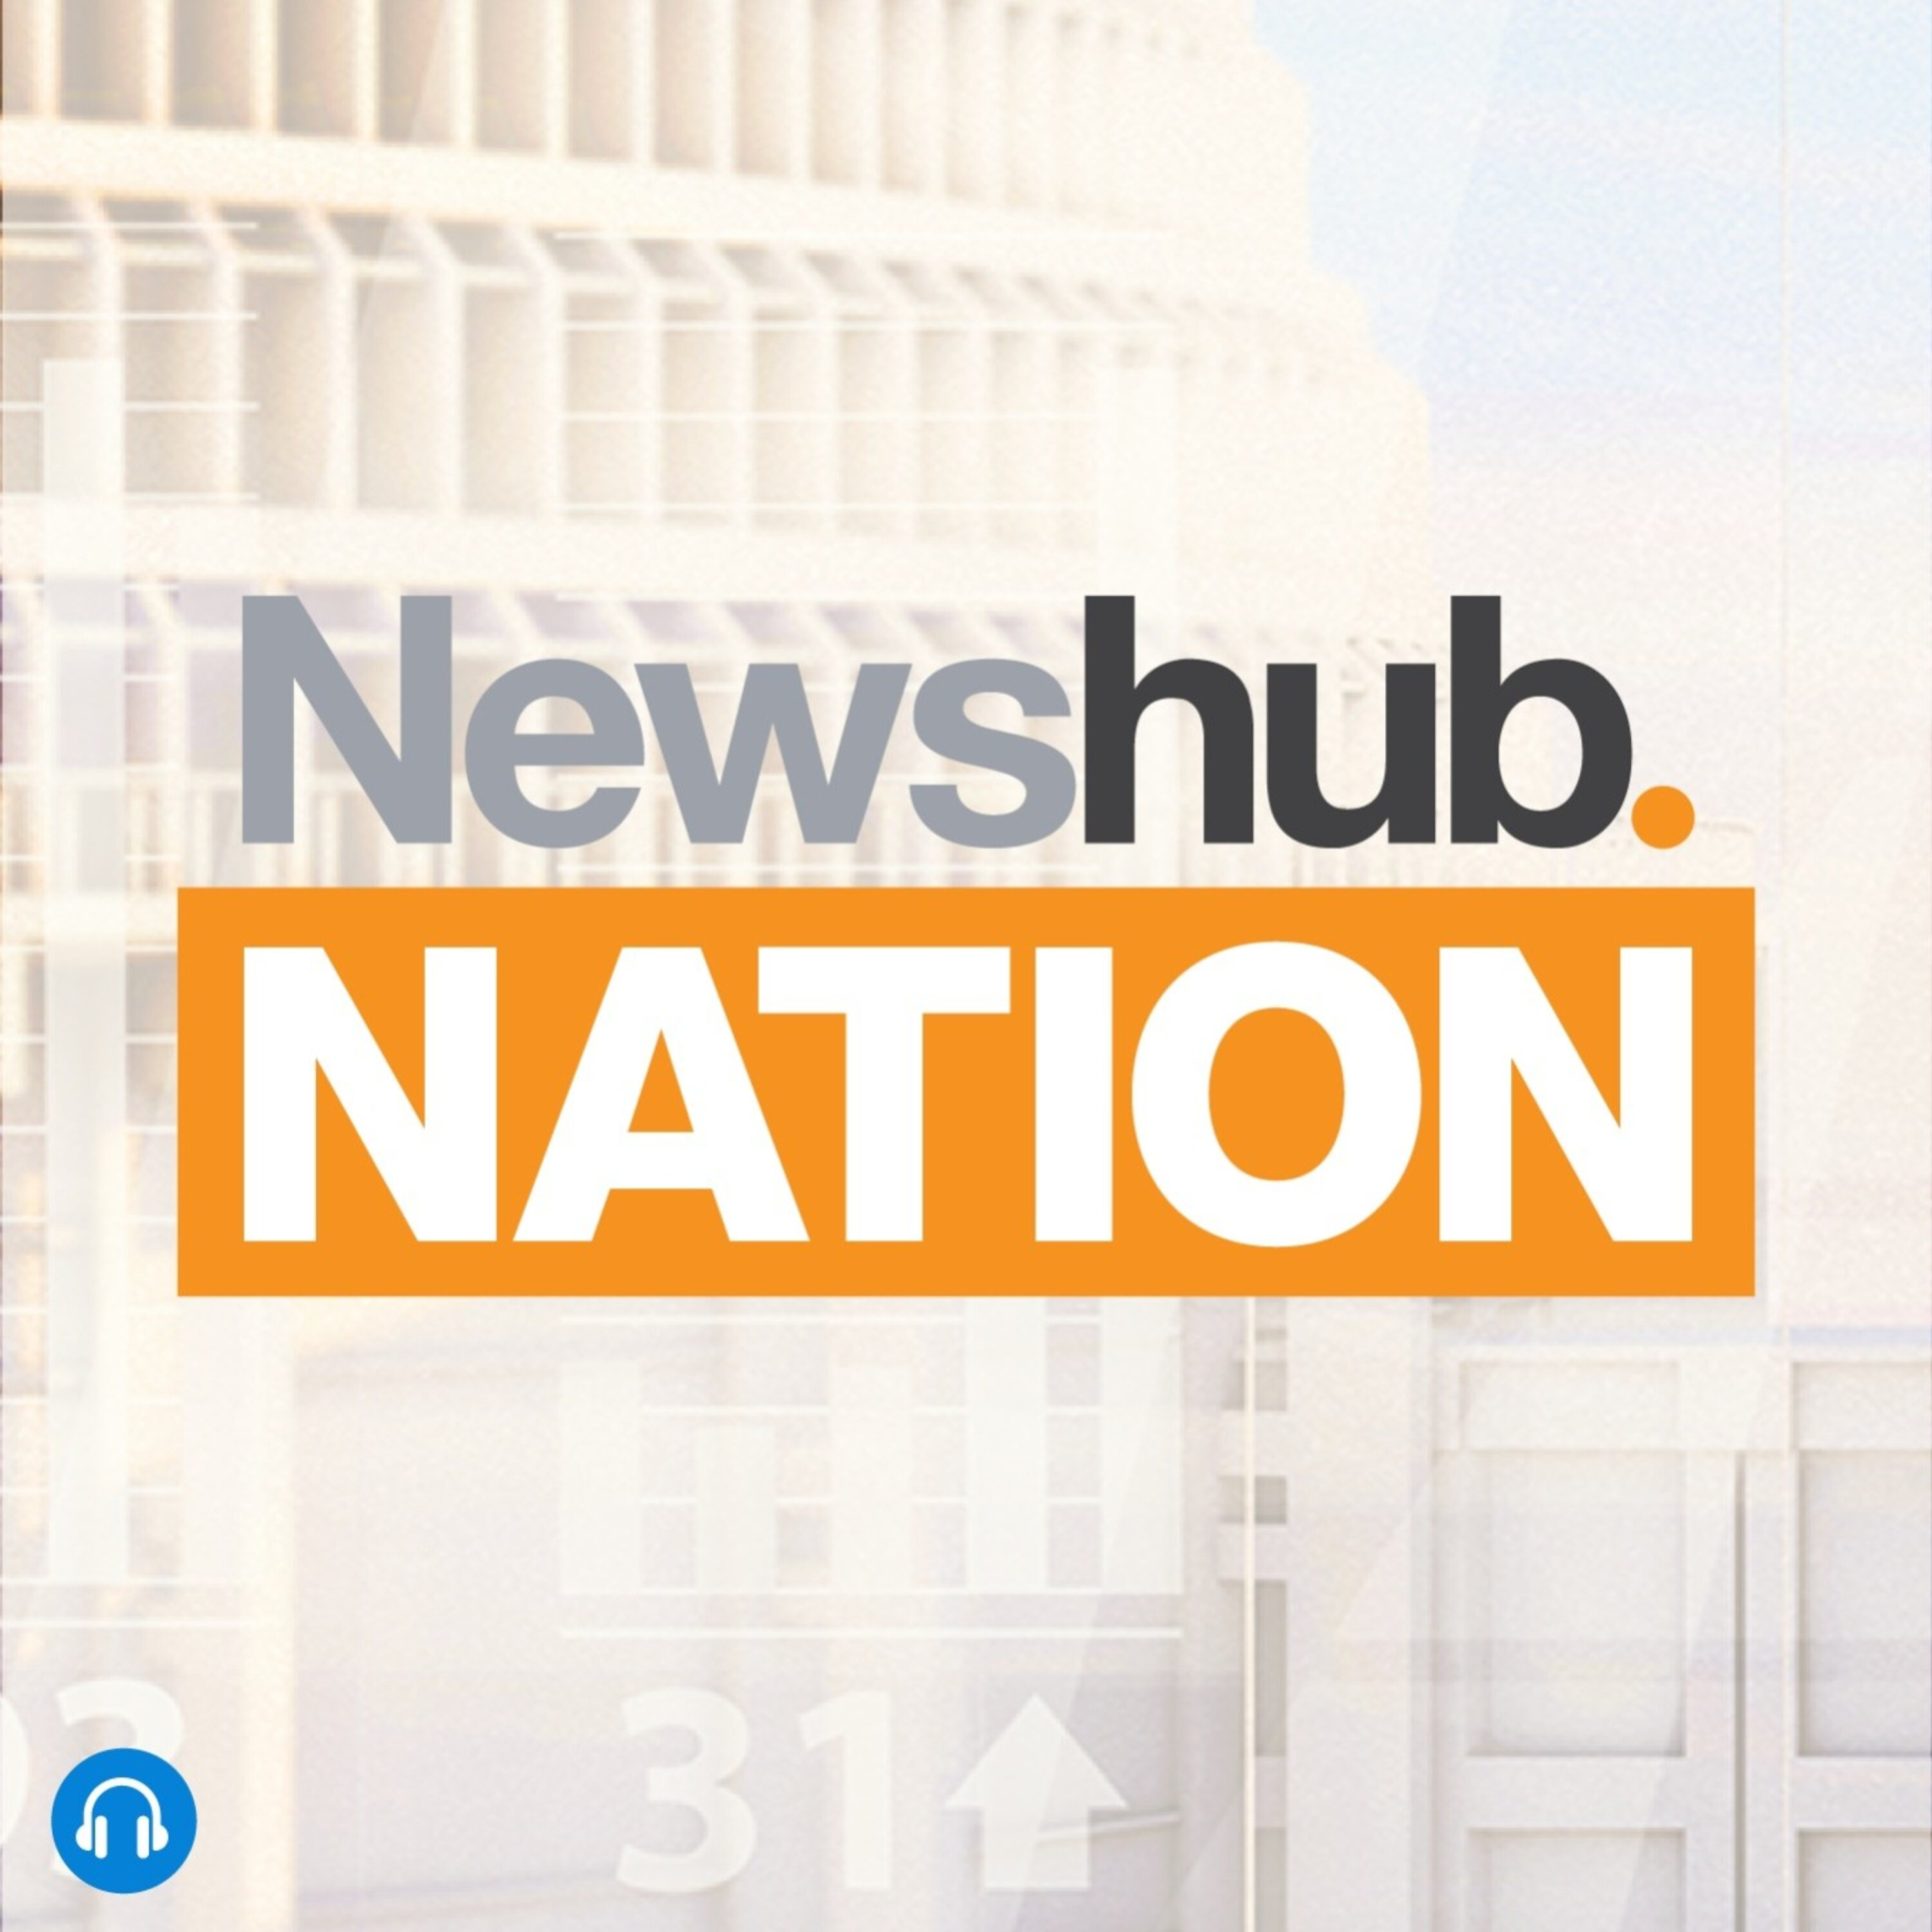 Newshub Nation post-election special